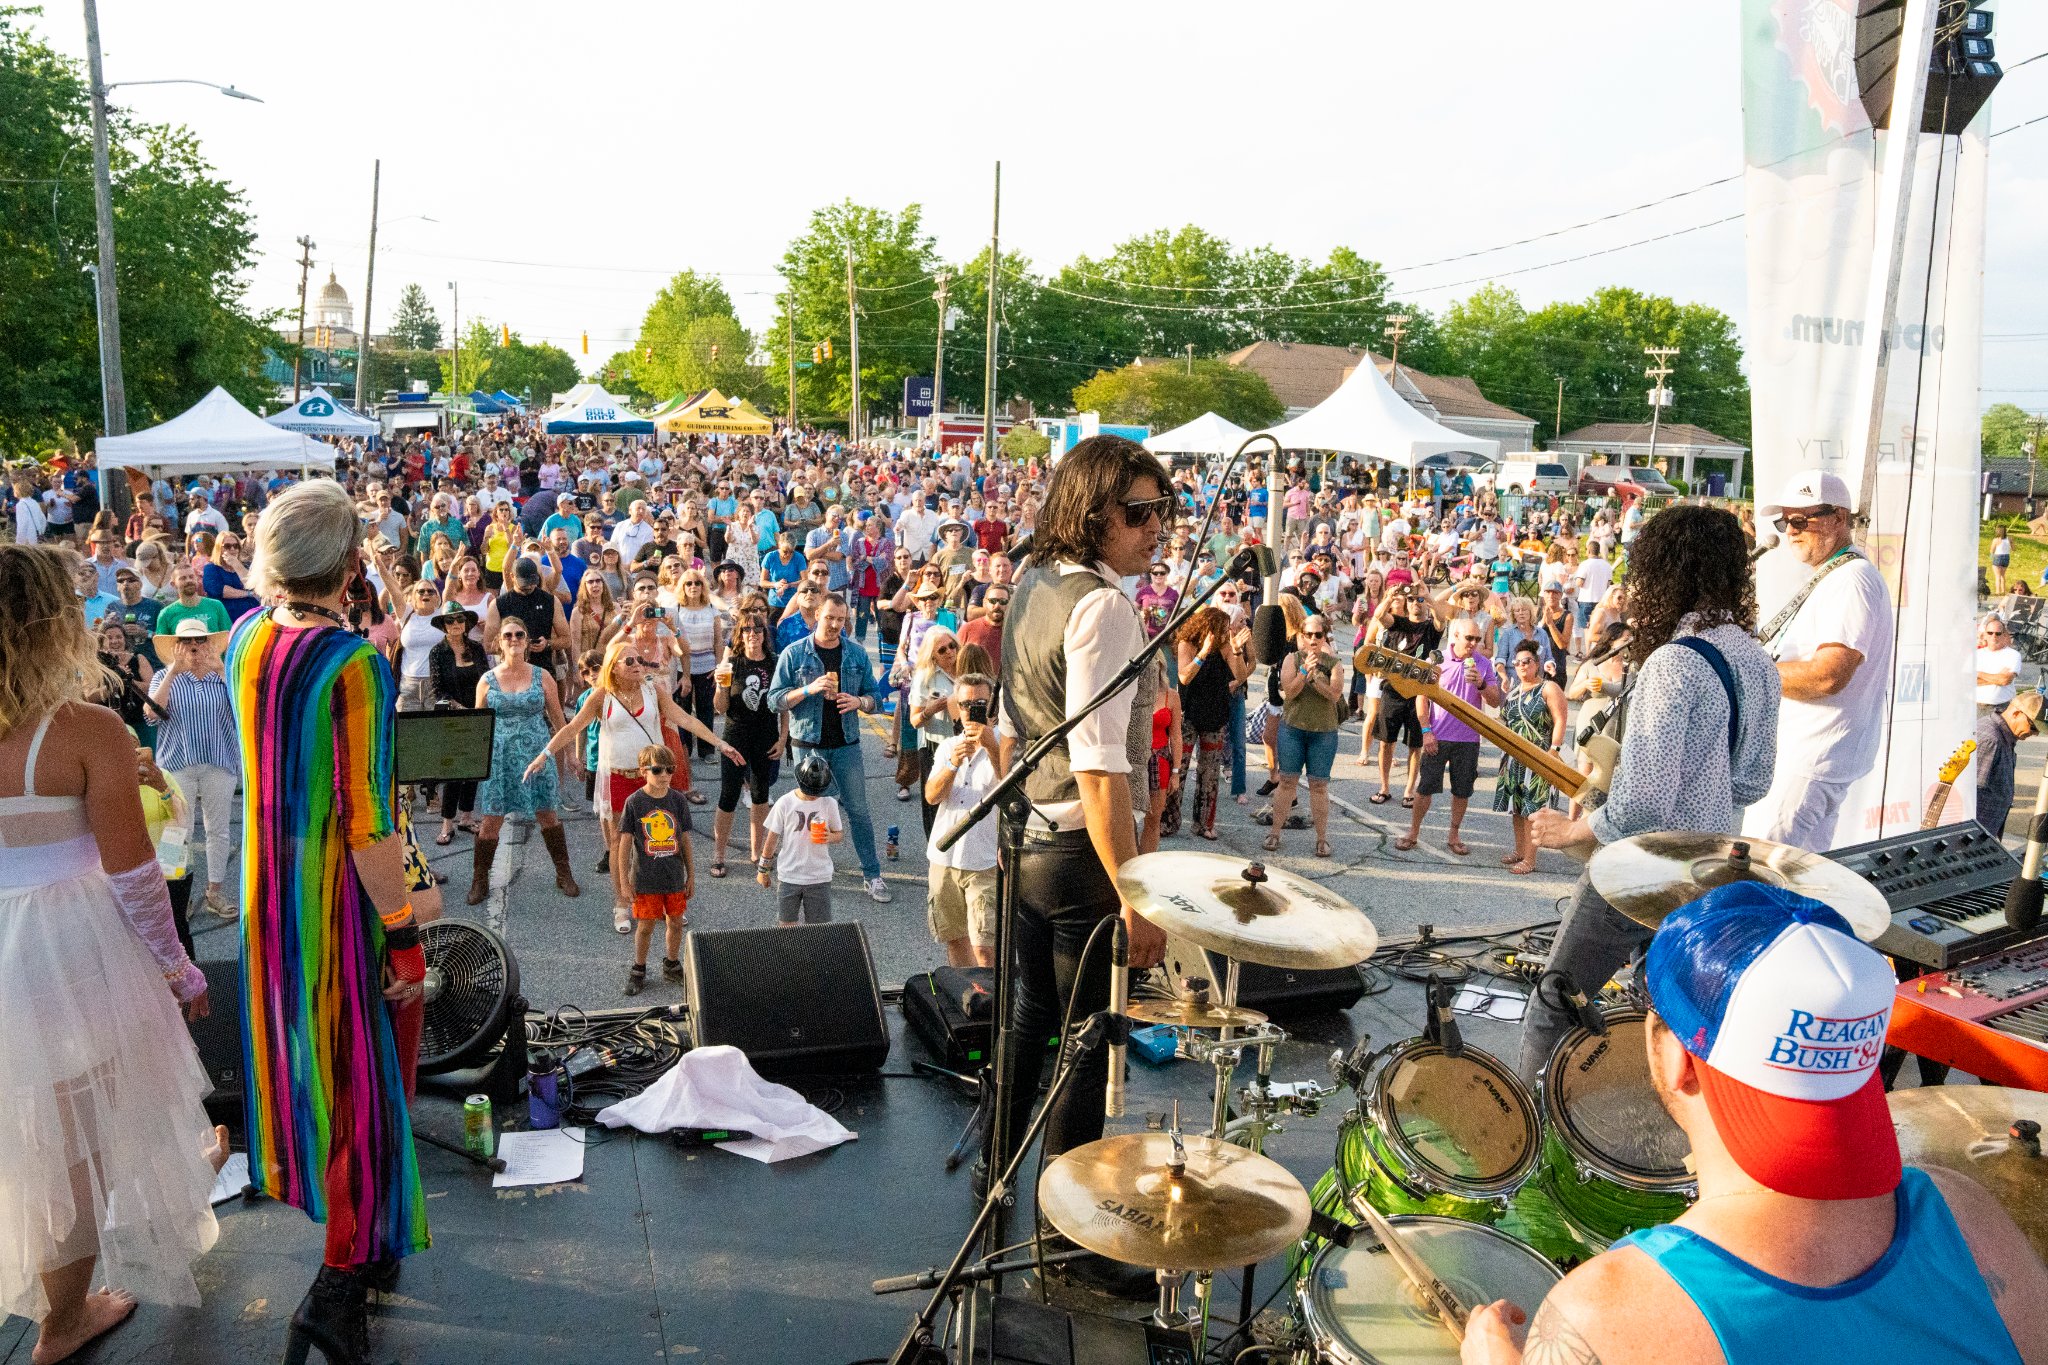 Rhythm & Brews Concert Series: A Celebration of Music, Craft Beverages, and Community Spirit in Downtown Hendersonville